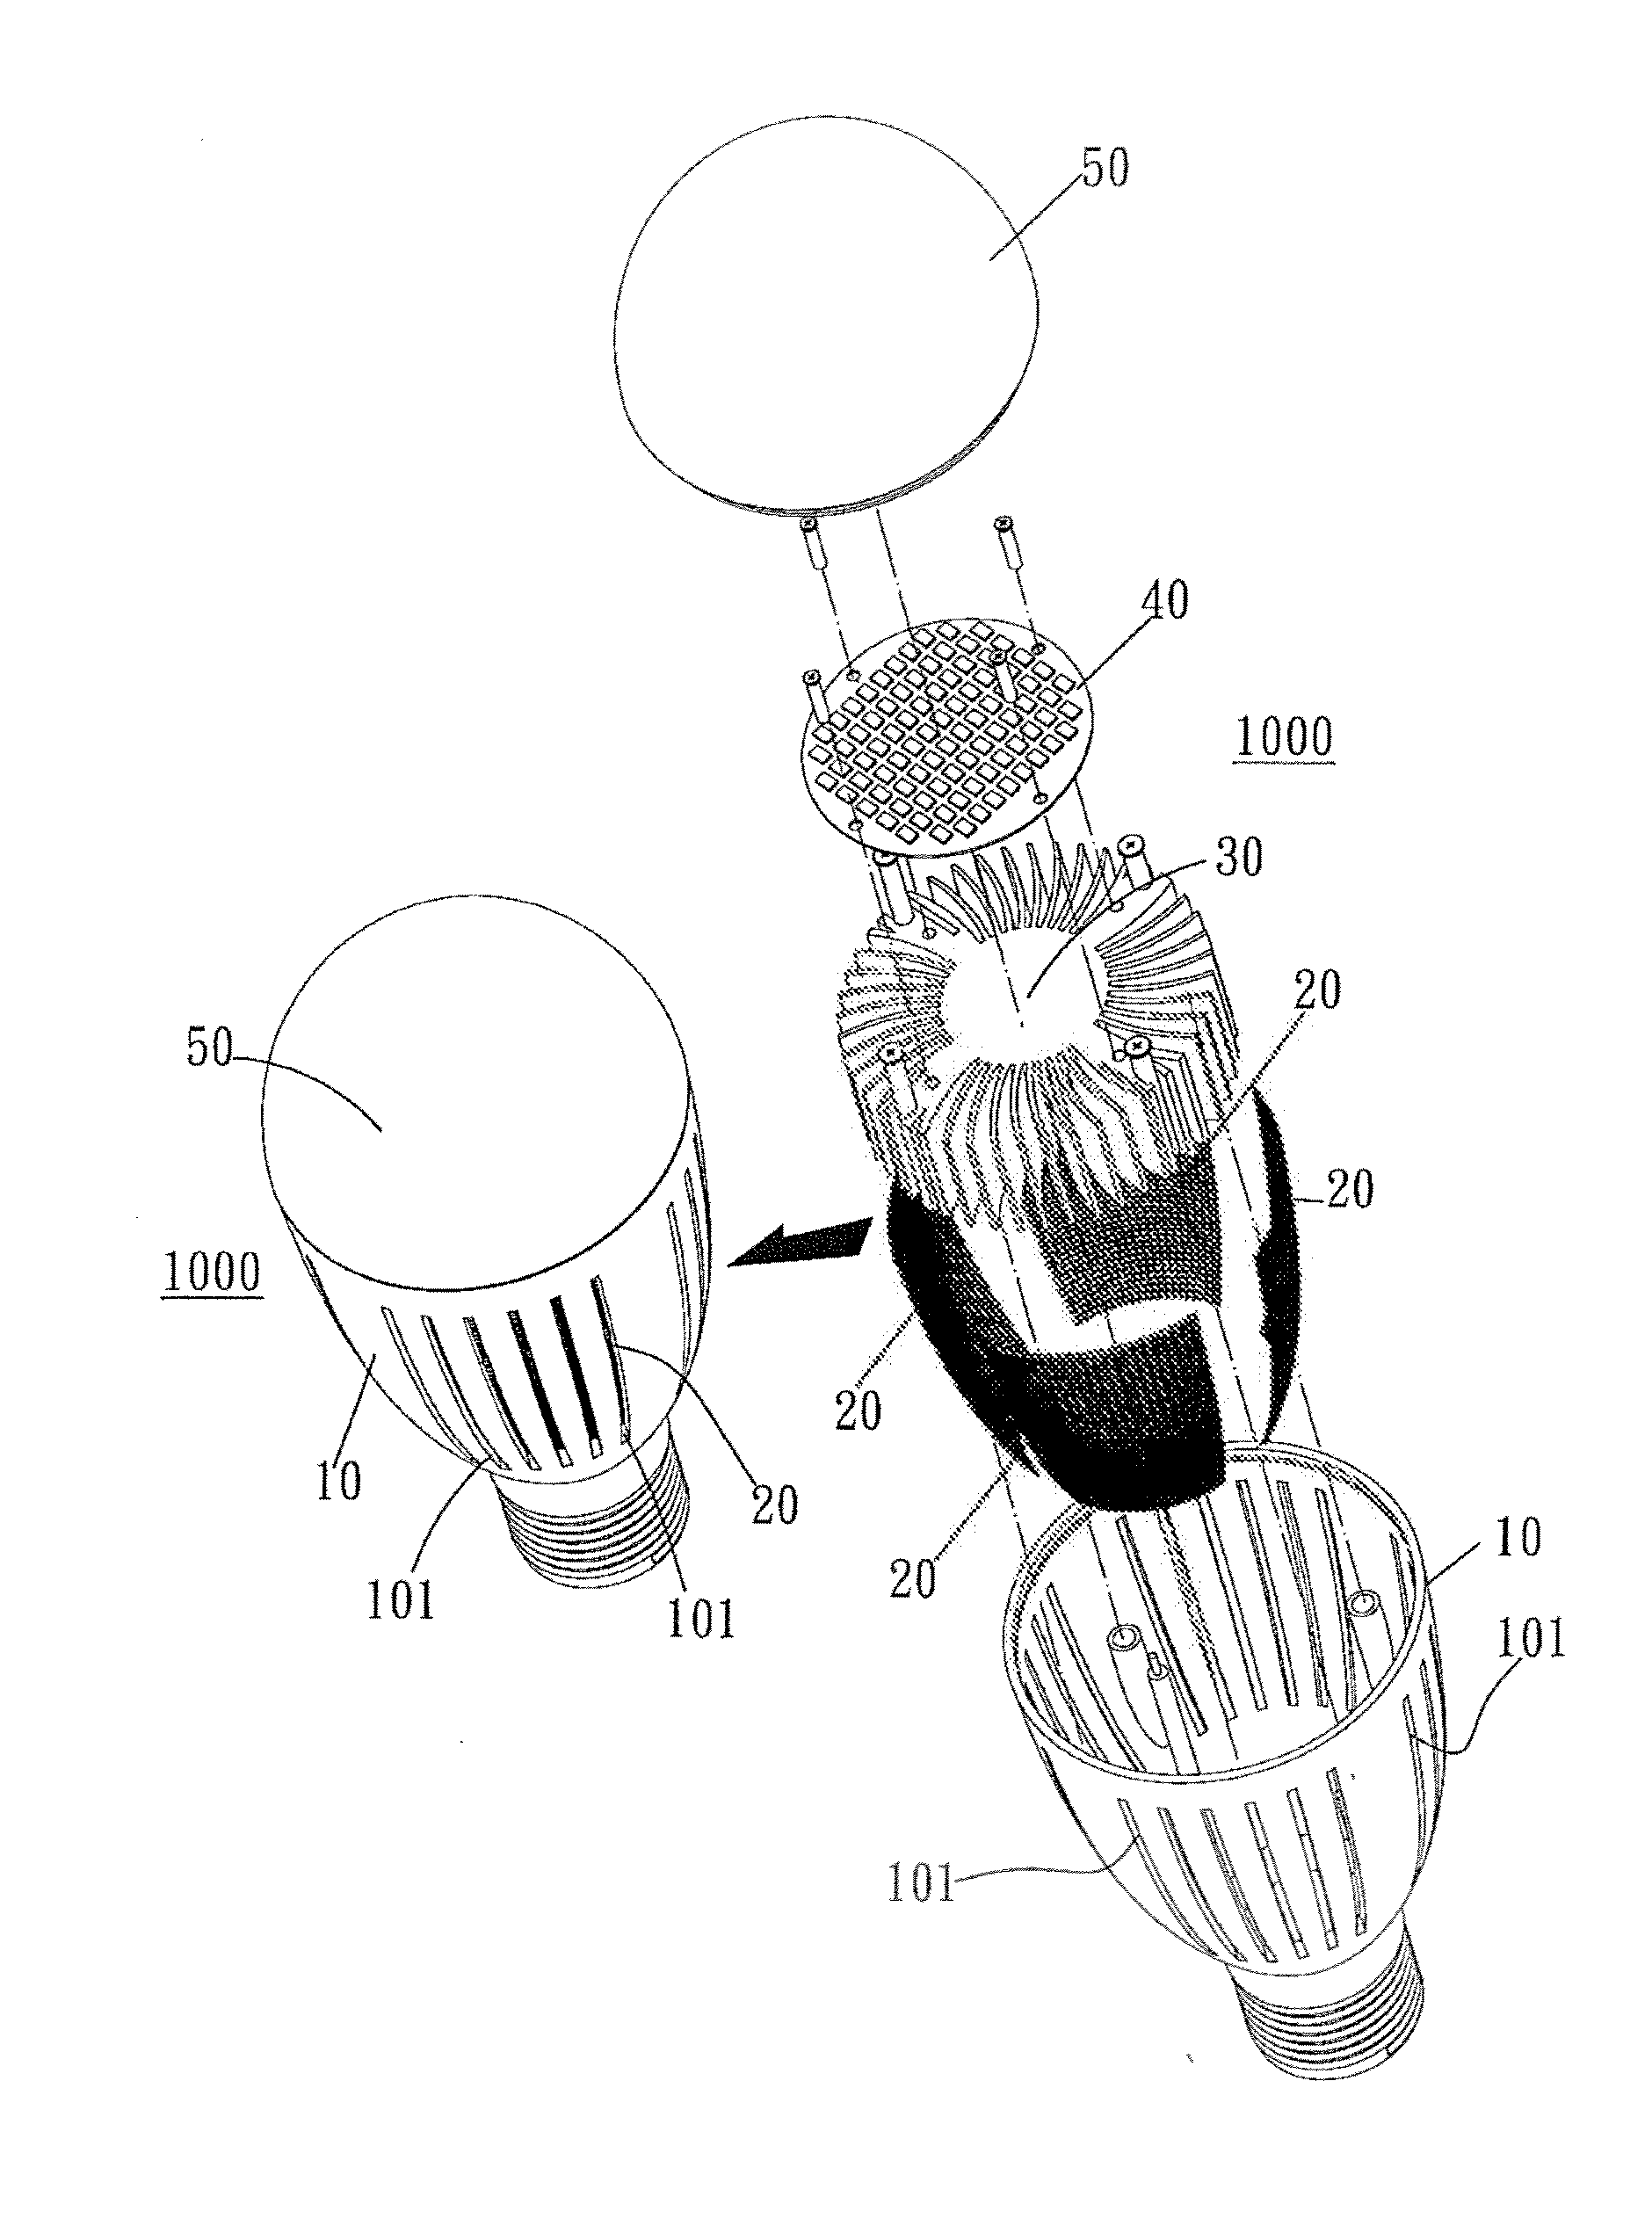 LED lightbulb with improved gain structure